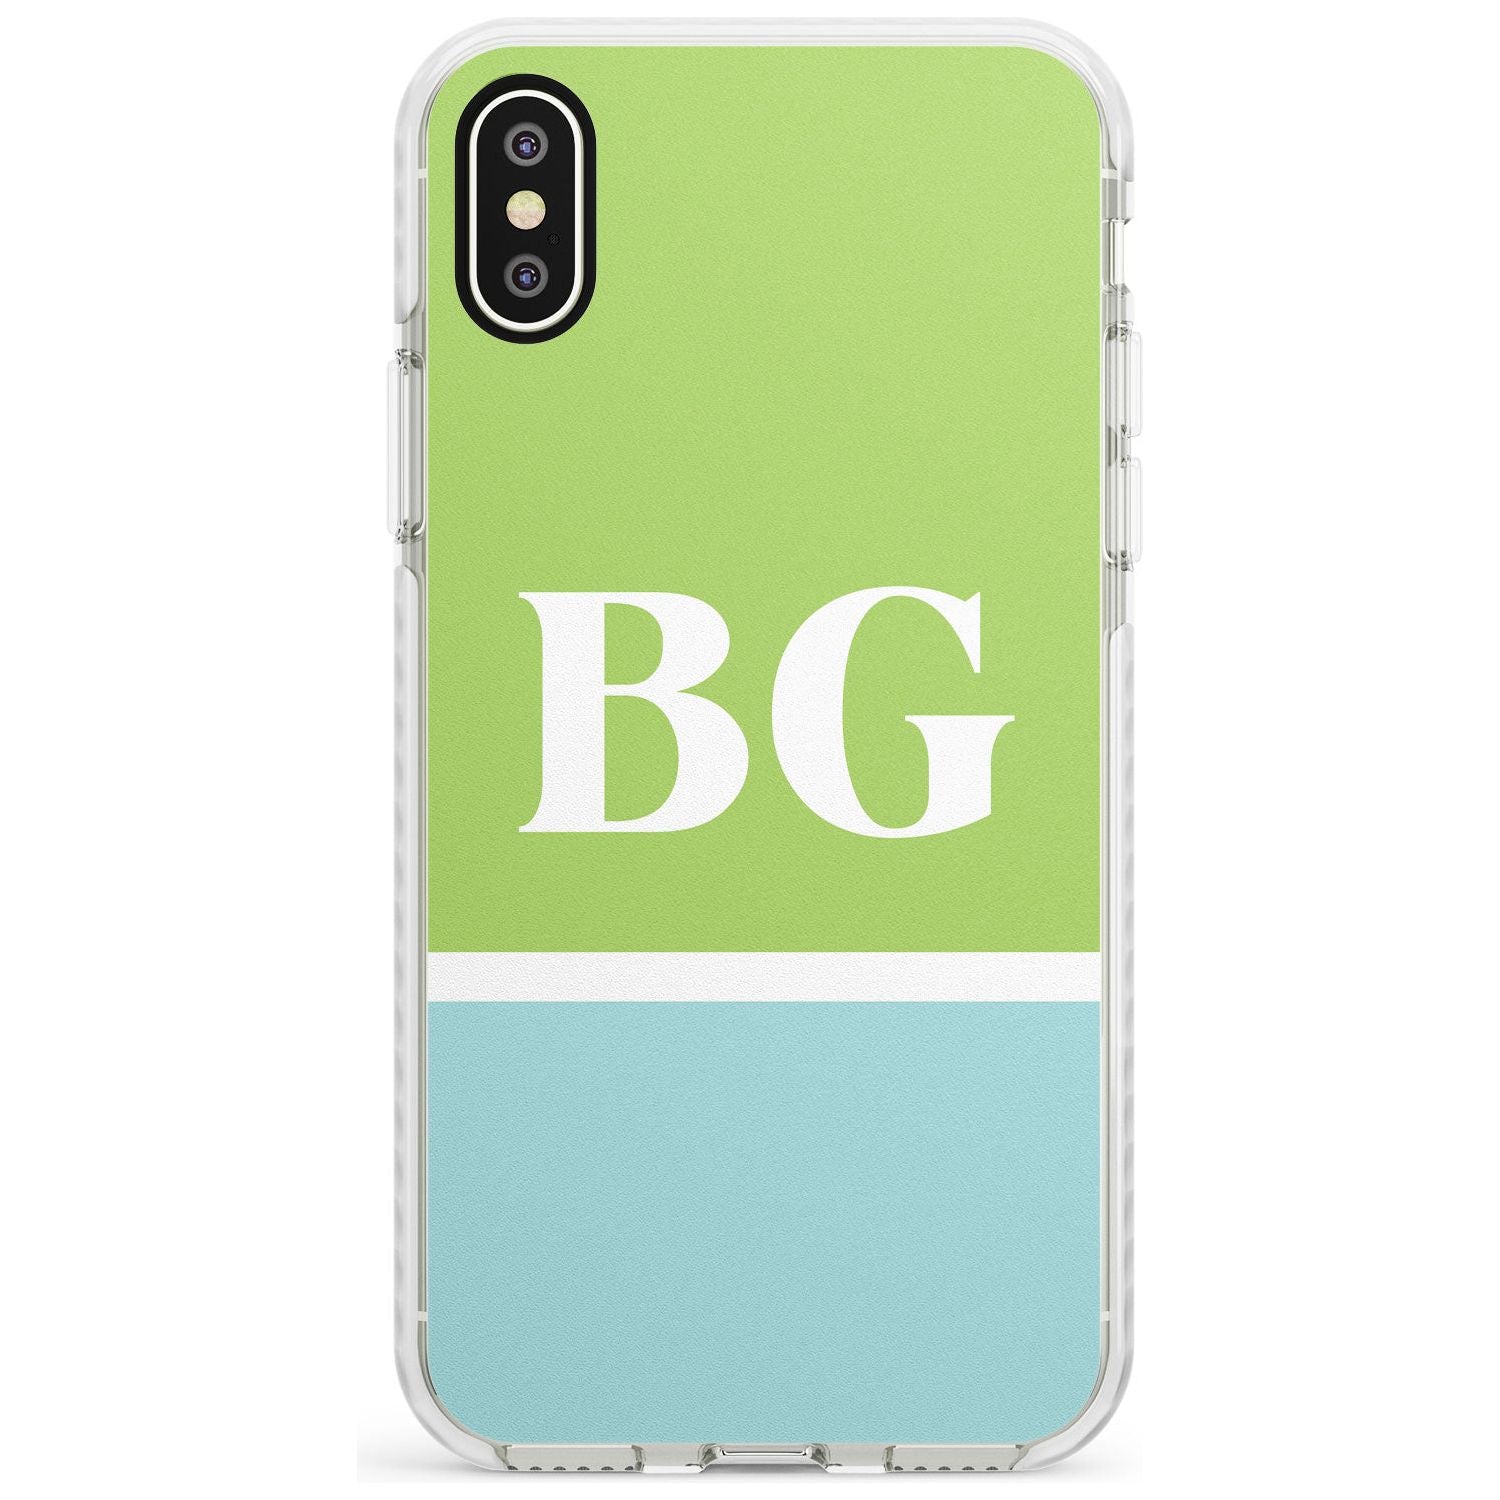 Colourblock: Green & Turquoise Impact Phone Case for iPhone X XS Max XR